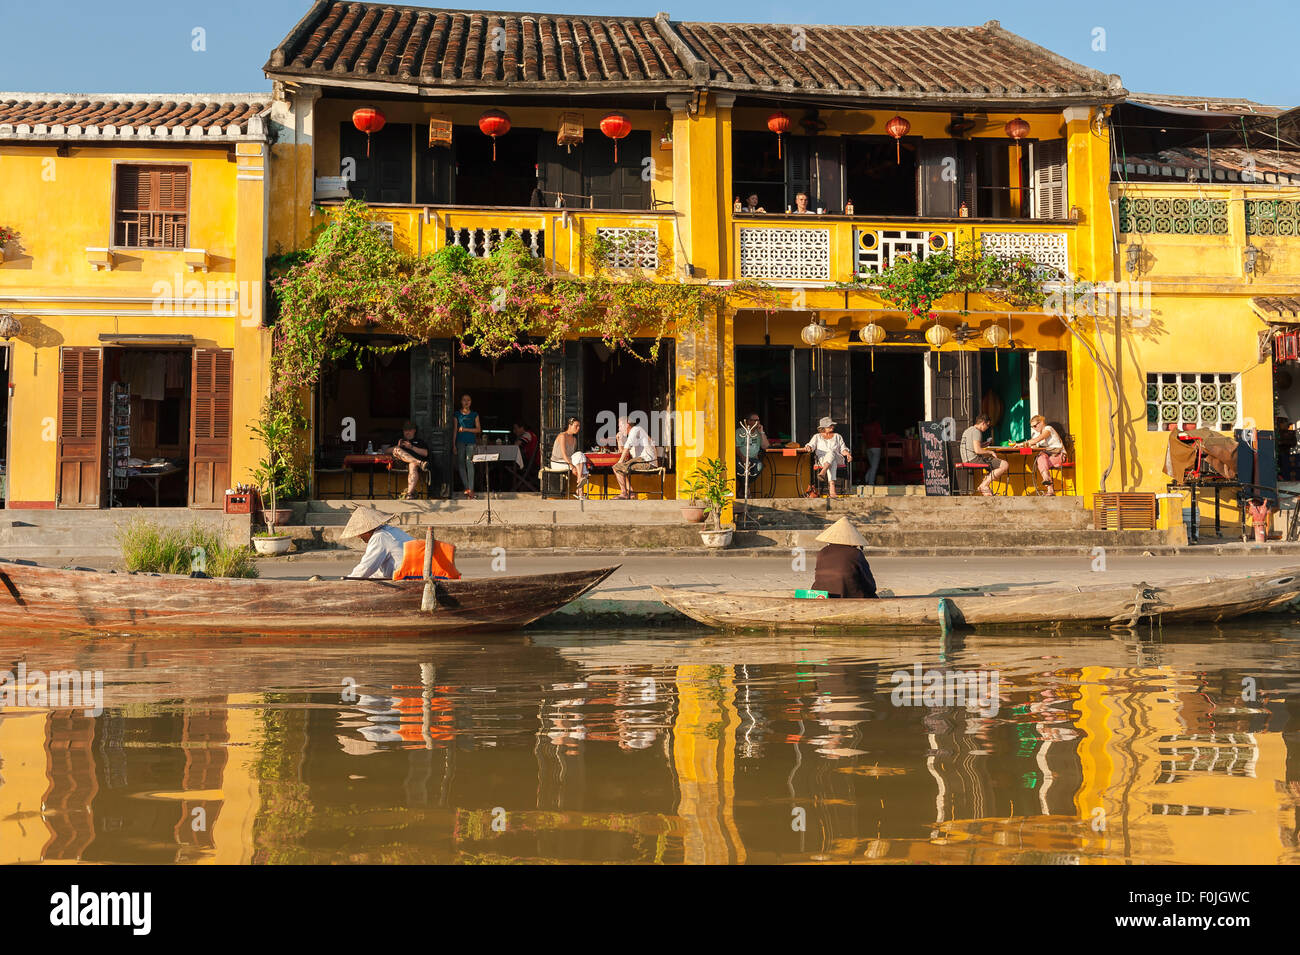 Vietnam color sunset, view of late afternoon sunshine illuminating the colorful waterfront tourist quarter in Hoi An, Vietnam Stock Photo